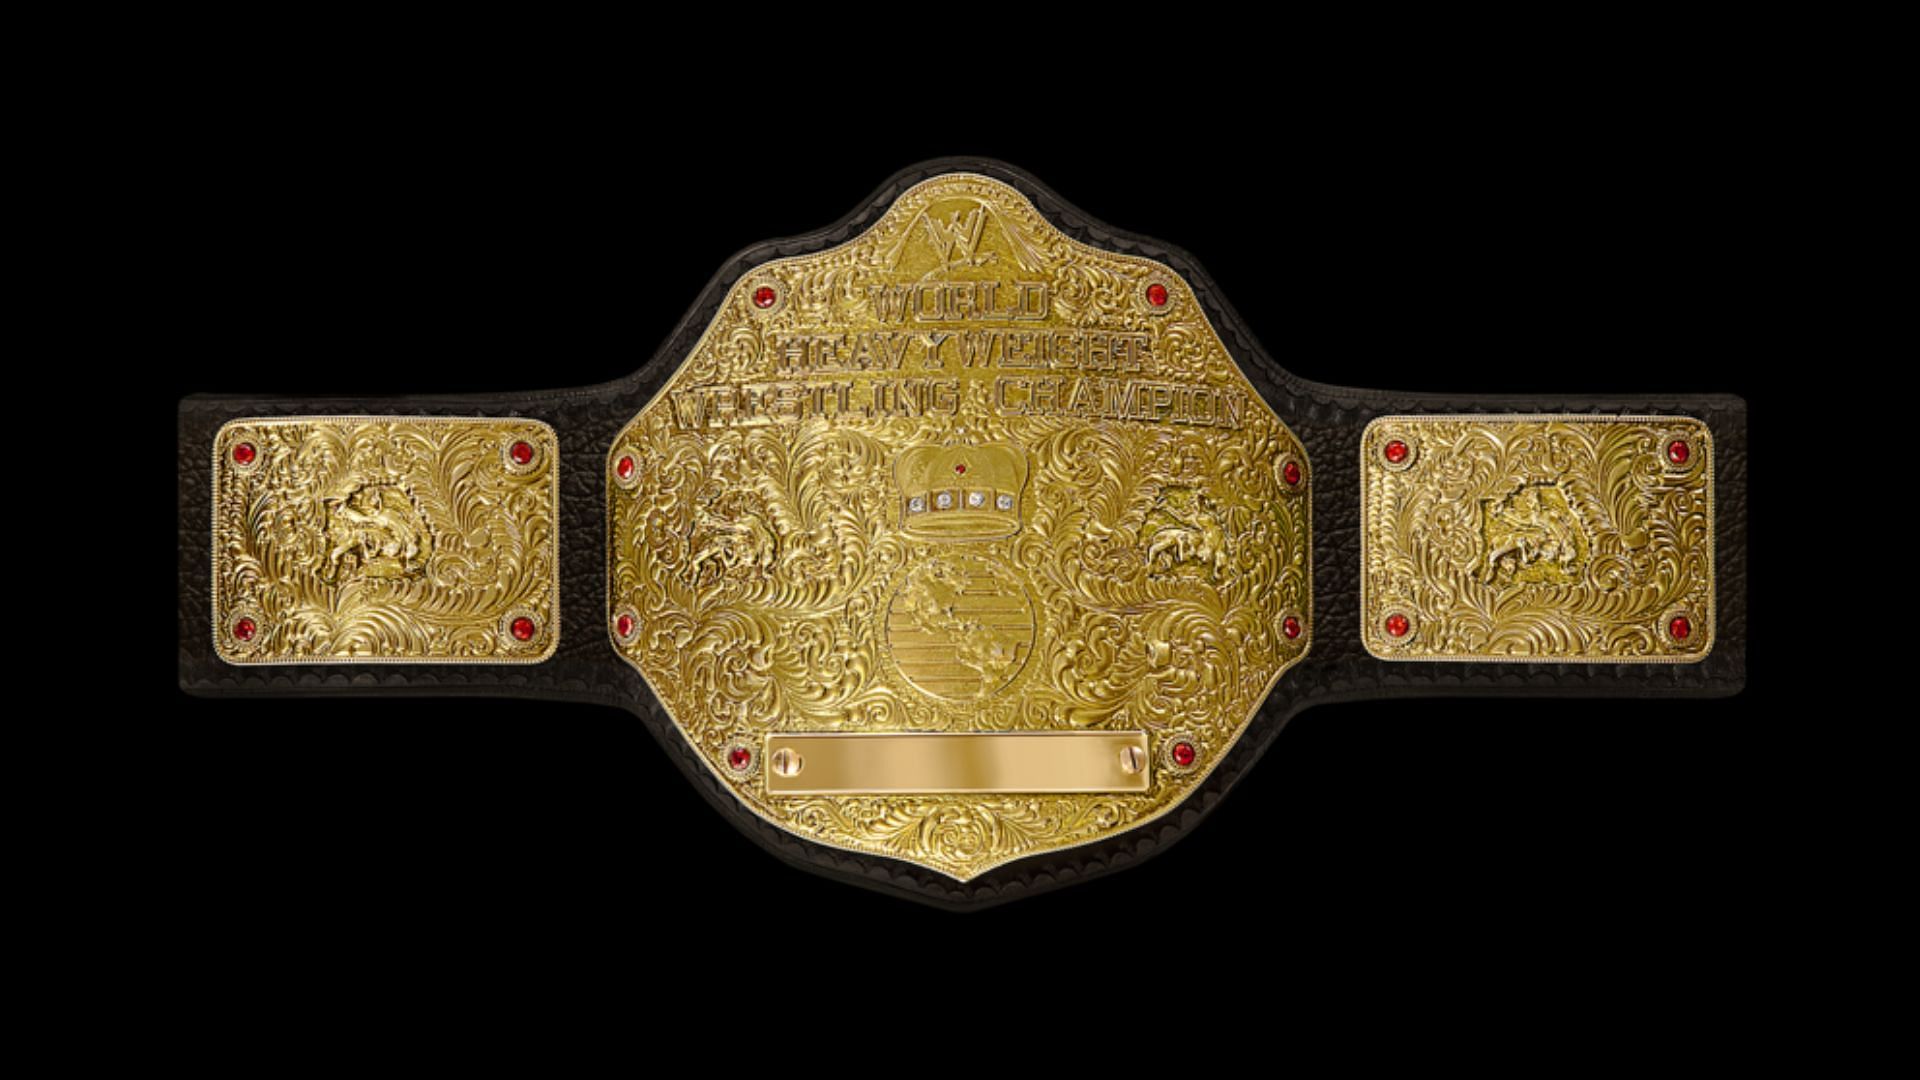 WWE World Heavyweight Championship was unified with the WWE Championship in 2013!